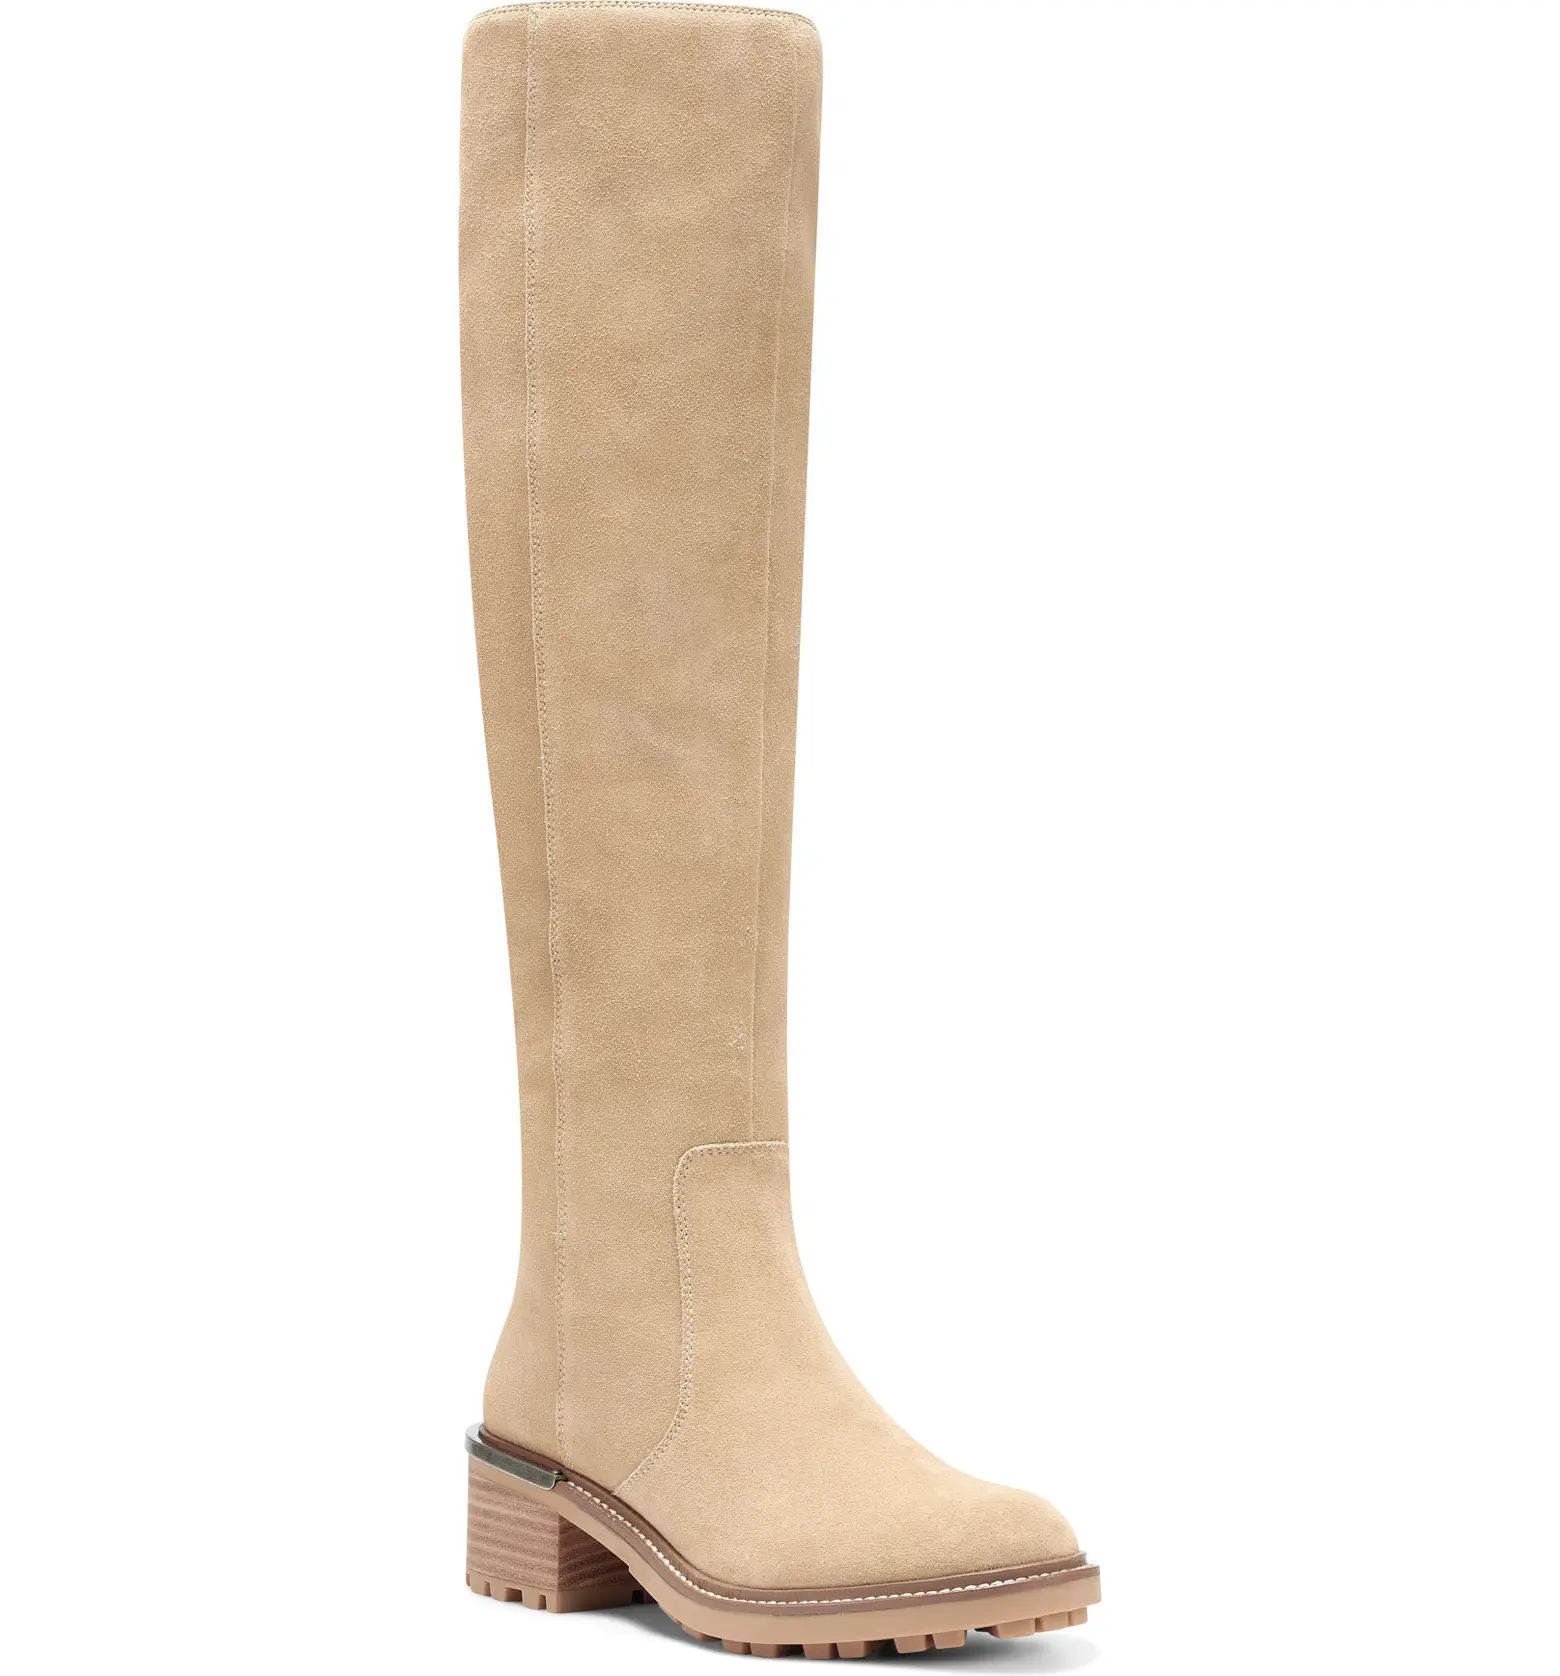 Kensilie Over the Knee Riding Boot | Nordstrom Rack